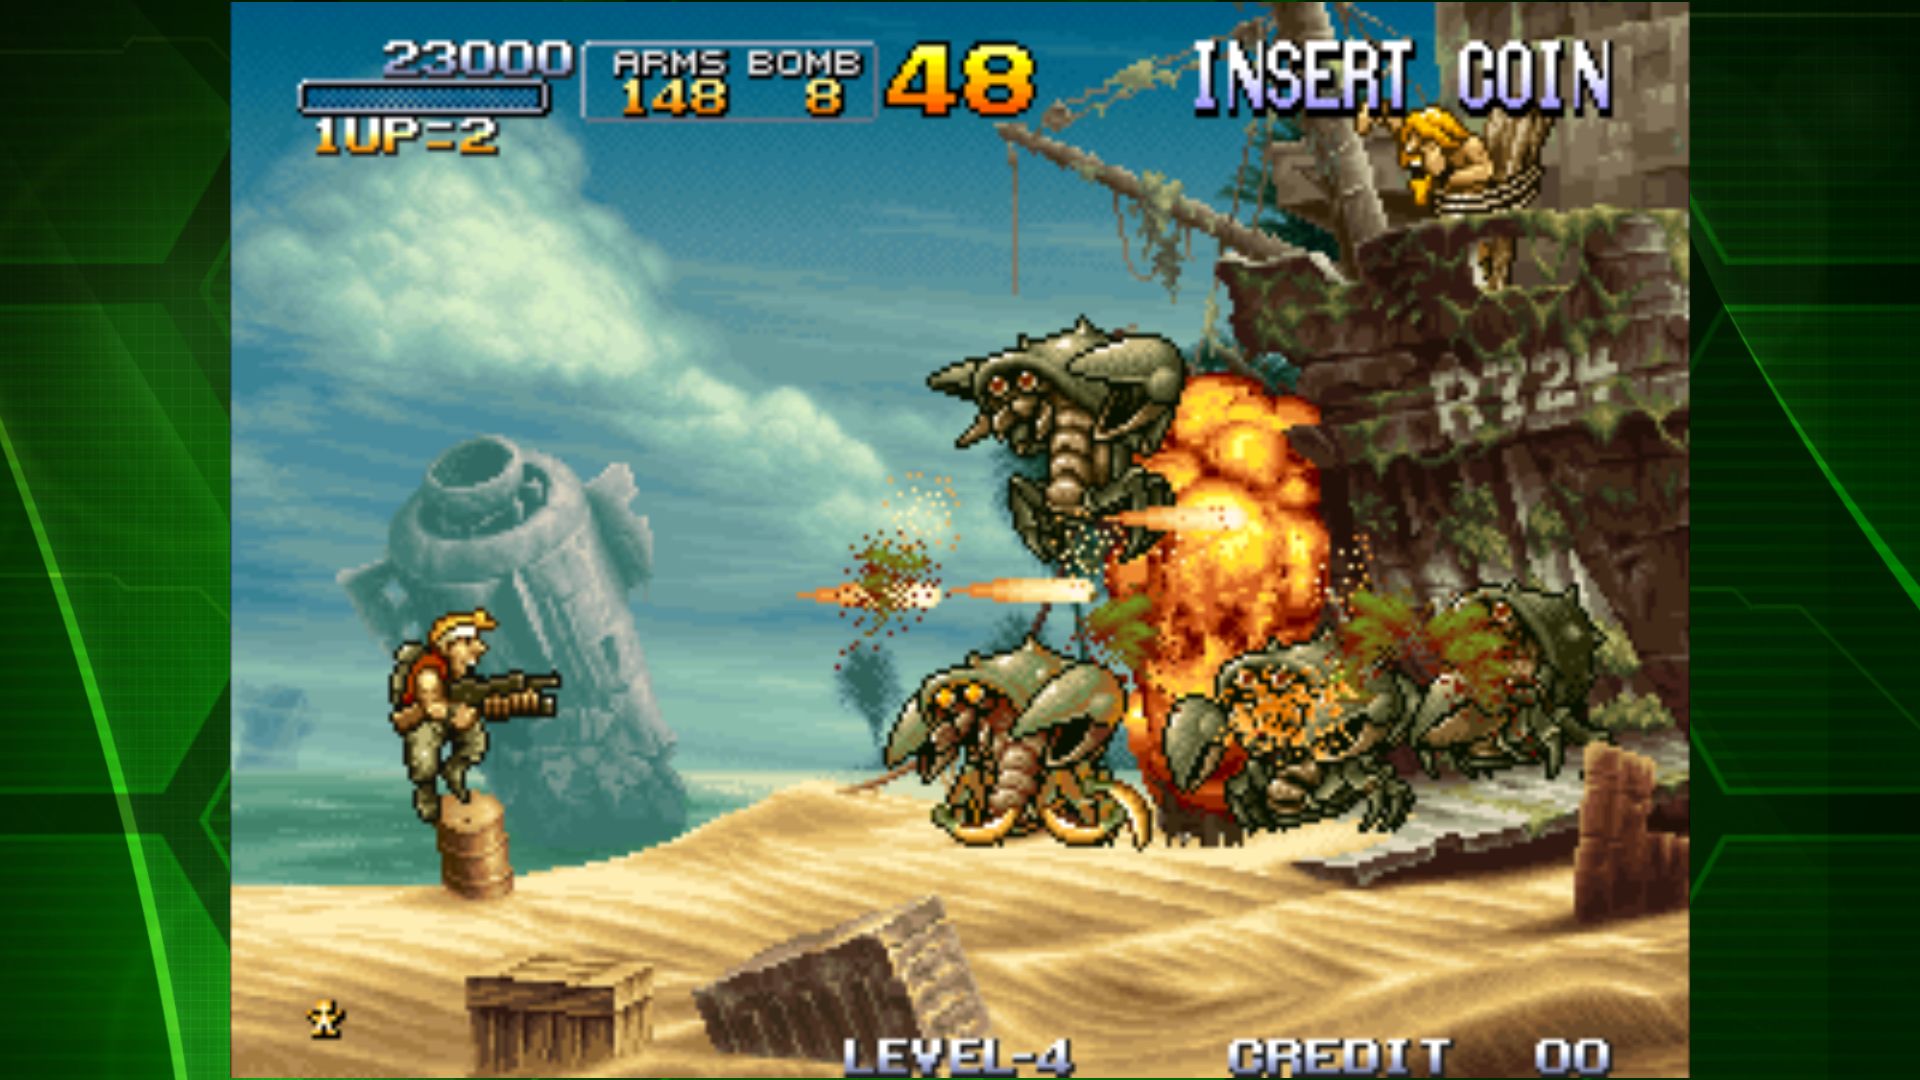 Gameplay of the METAL SLUG 3 ACA NEOGEO for Android phone or tablet.